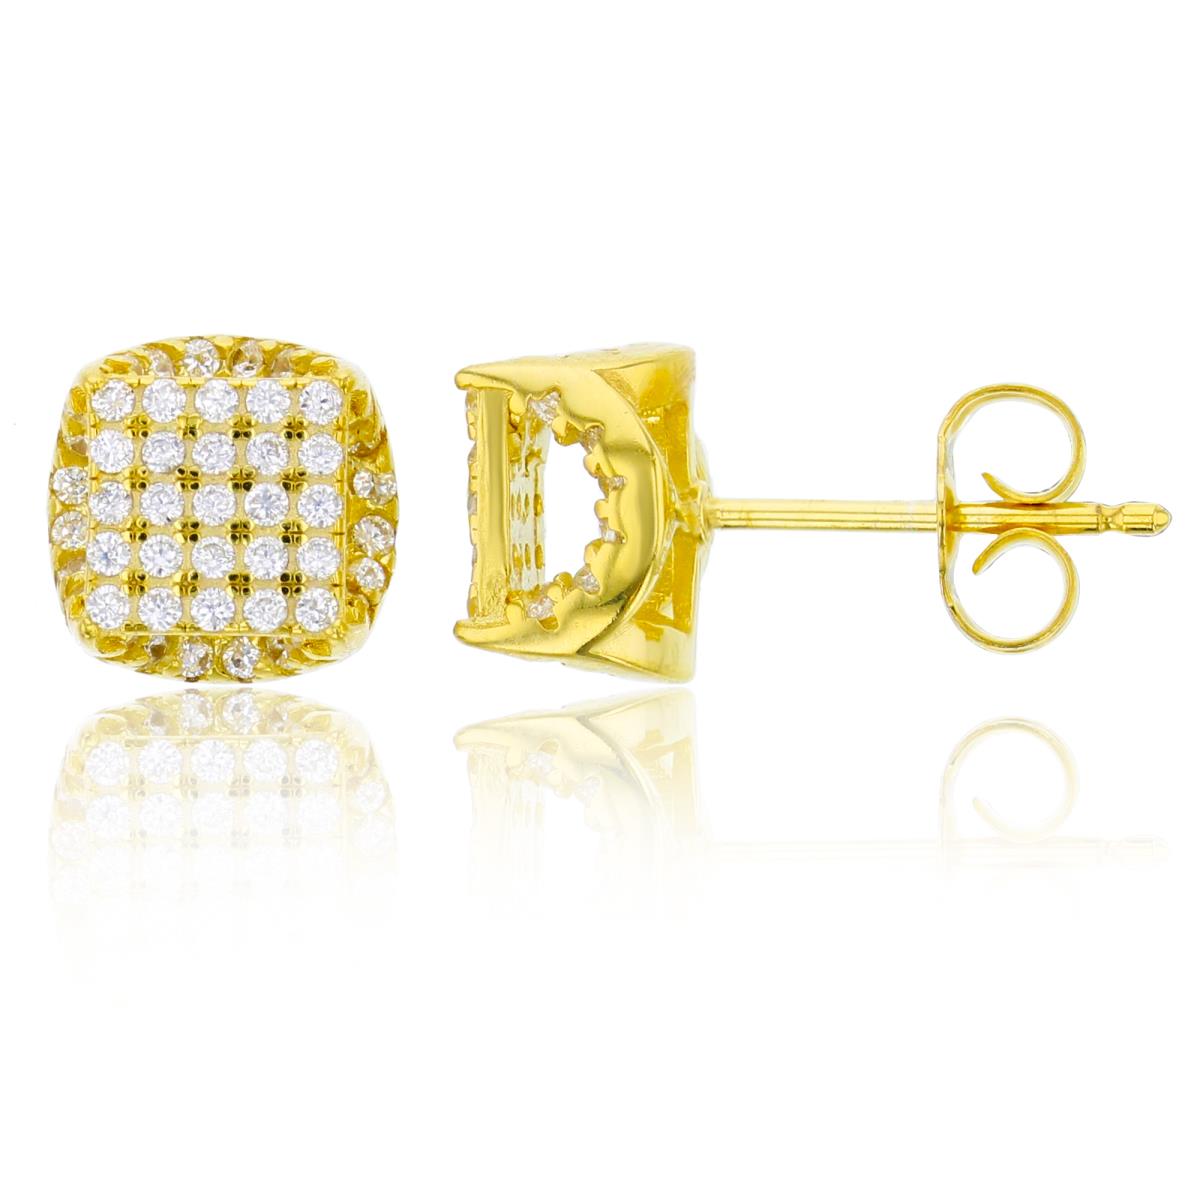 Sterling Silver Yellow 9mm Micropave 3D Square Stud Earring